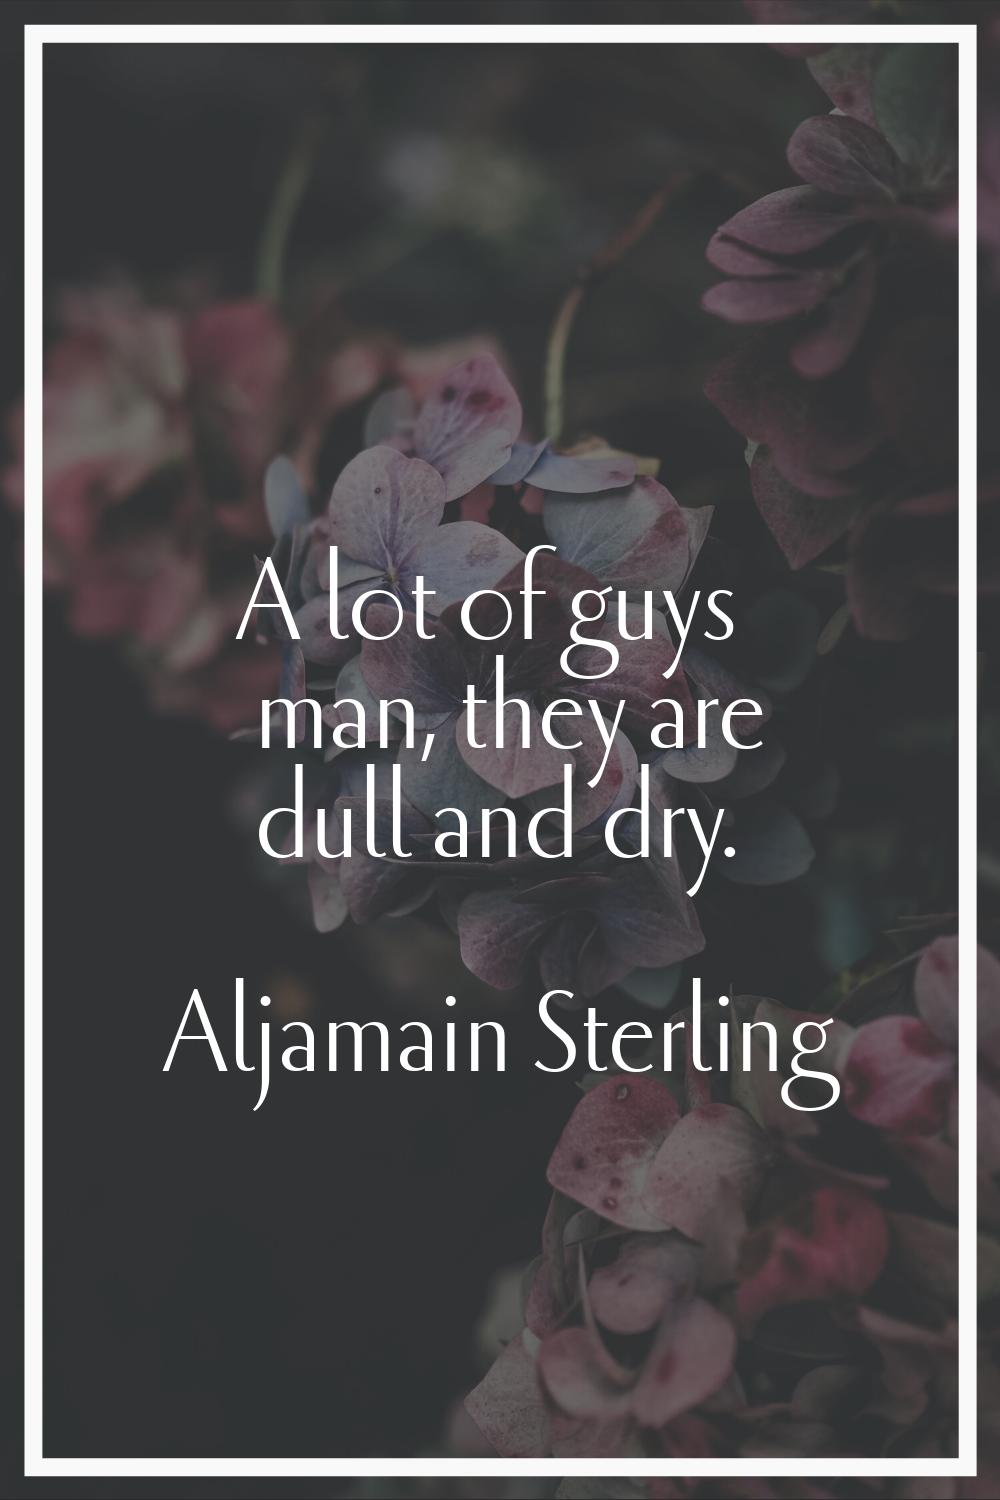 A lot of guys man, they are dull and dry.